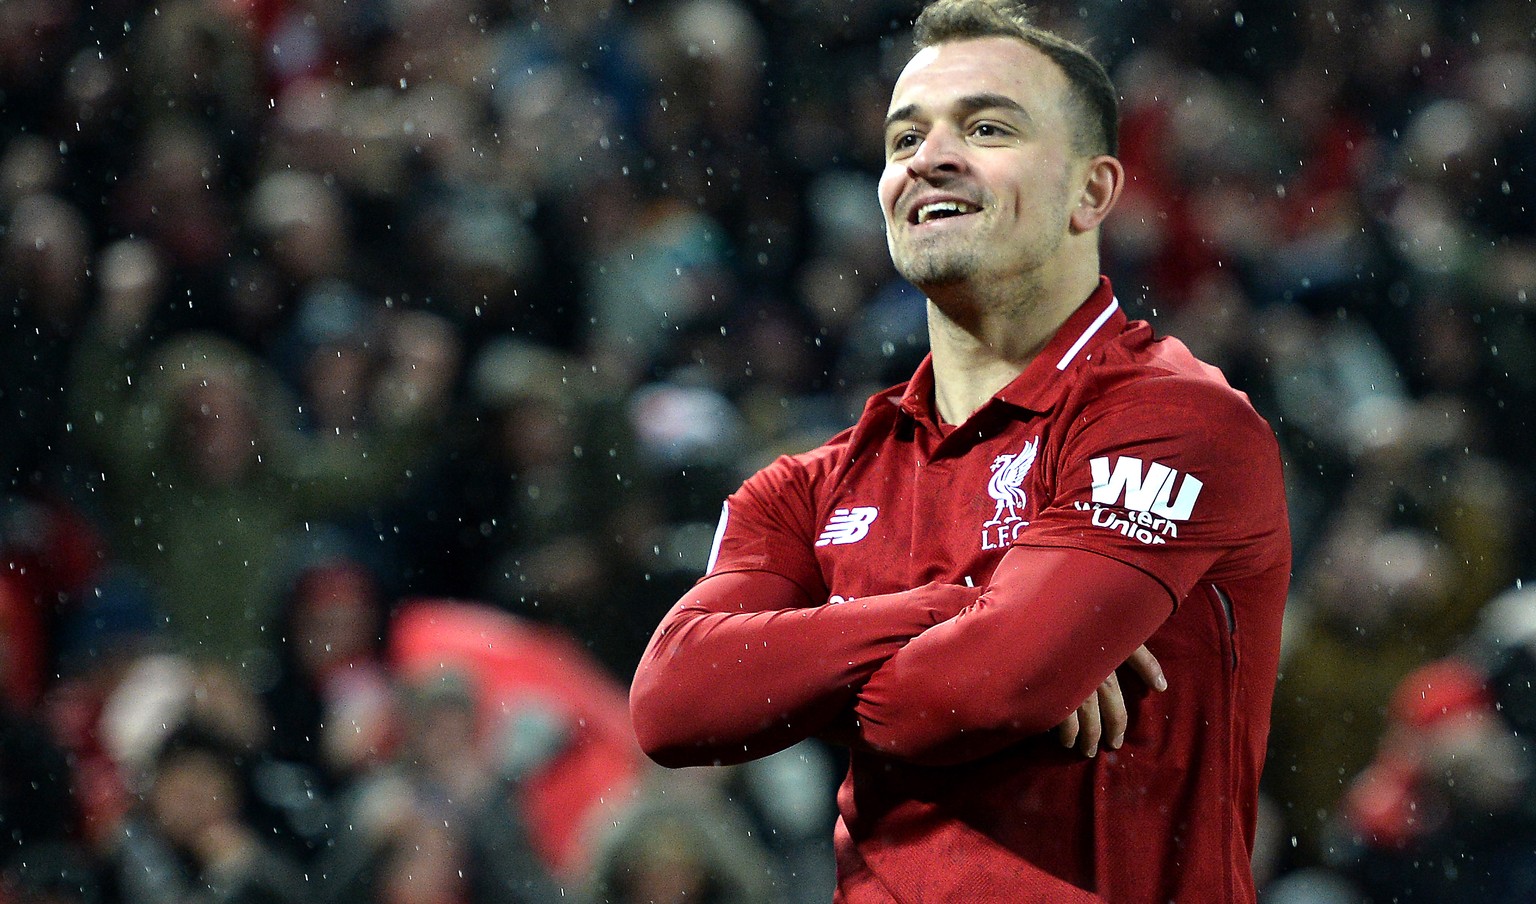 epa07236003 Xherdan Shaqiri of Liverpool celebrates after scoring during the English Premier League soccer match between Liverpool FC and Manchester United FC at Anfield in Liverpool, Britain, 16 Dece ...